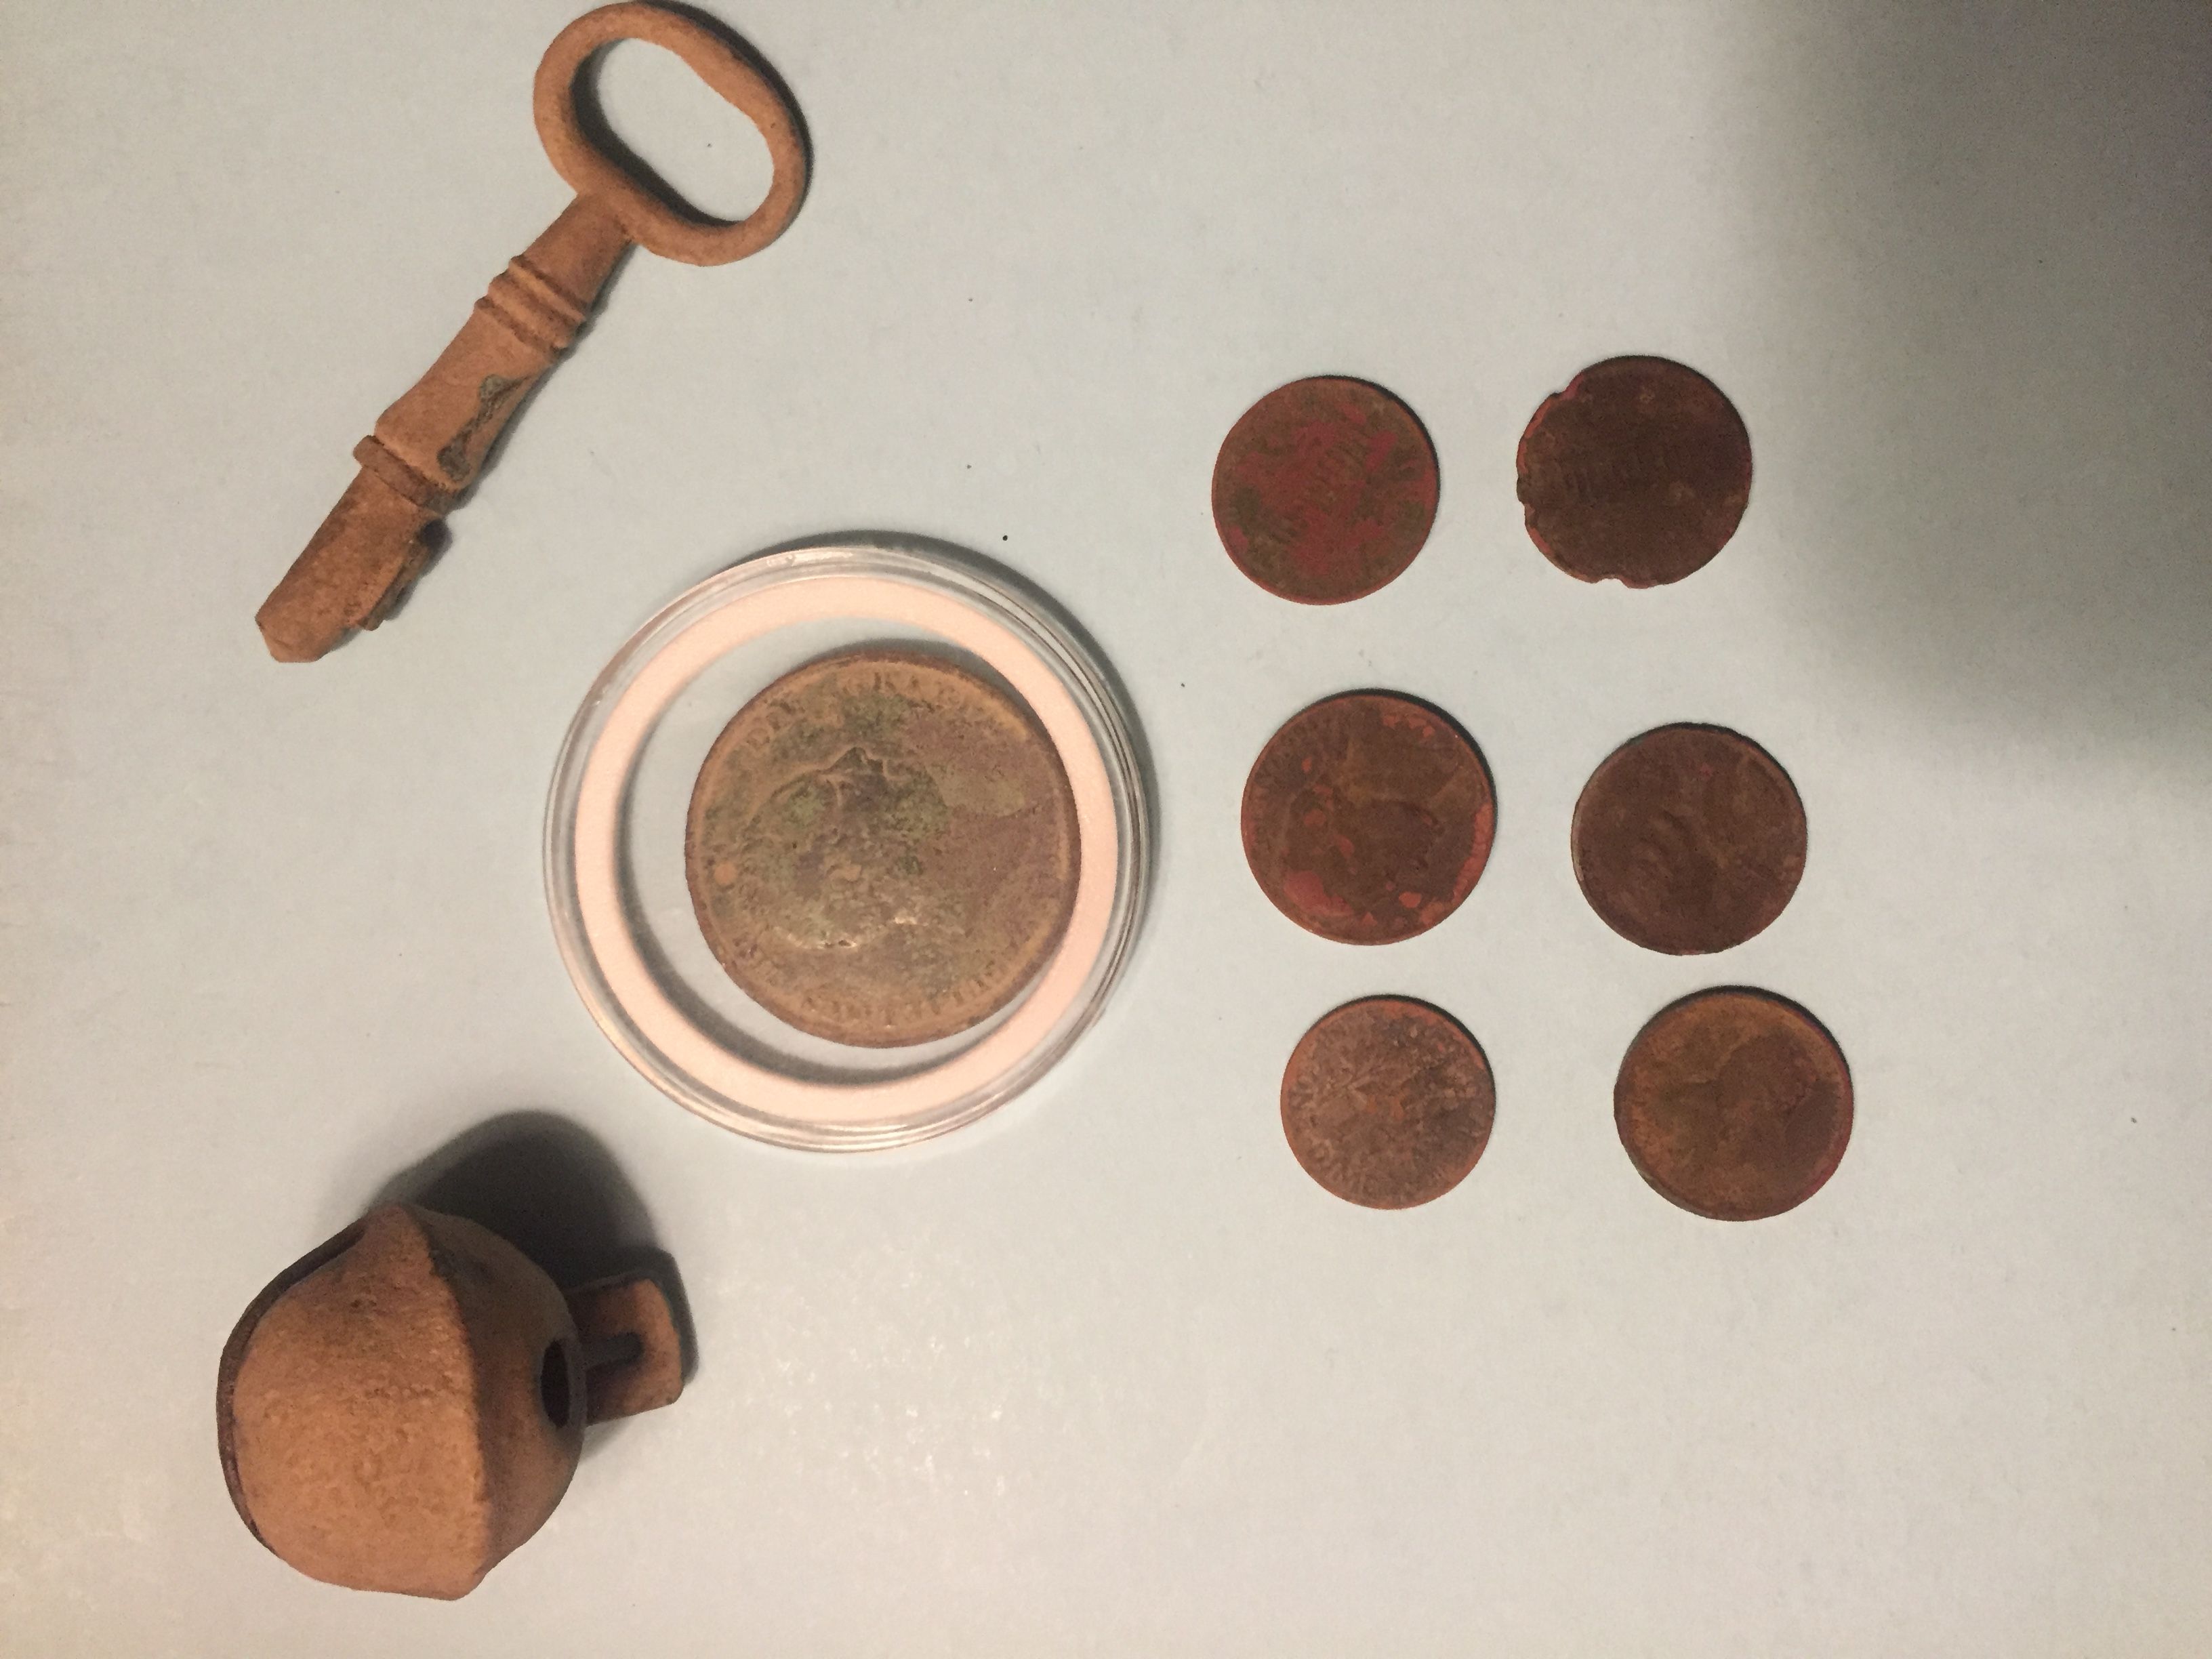 First hunt at new site! 1831 King William IV Penny, Skeleton Key, Crotal Bell and modern change. The only thing pictured cleaned is the penny.